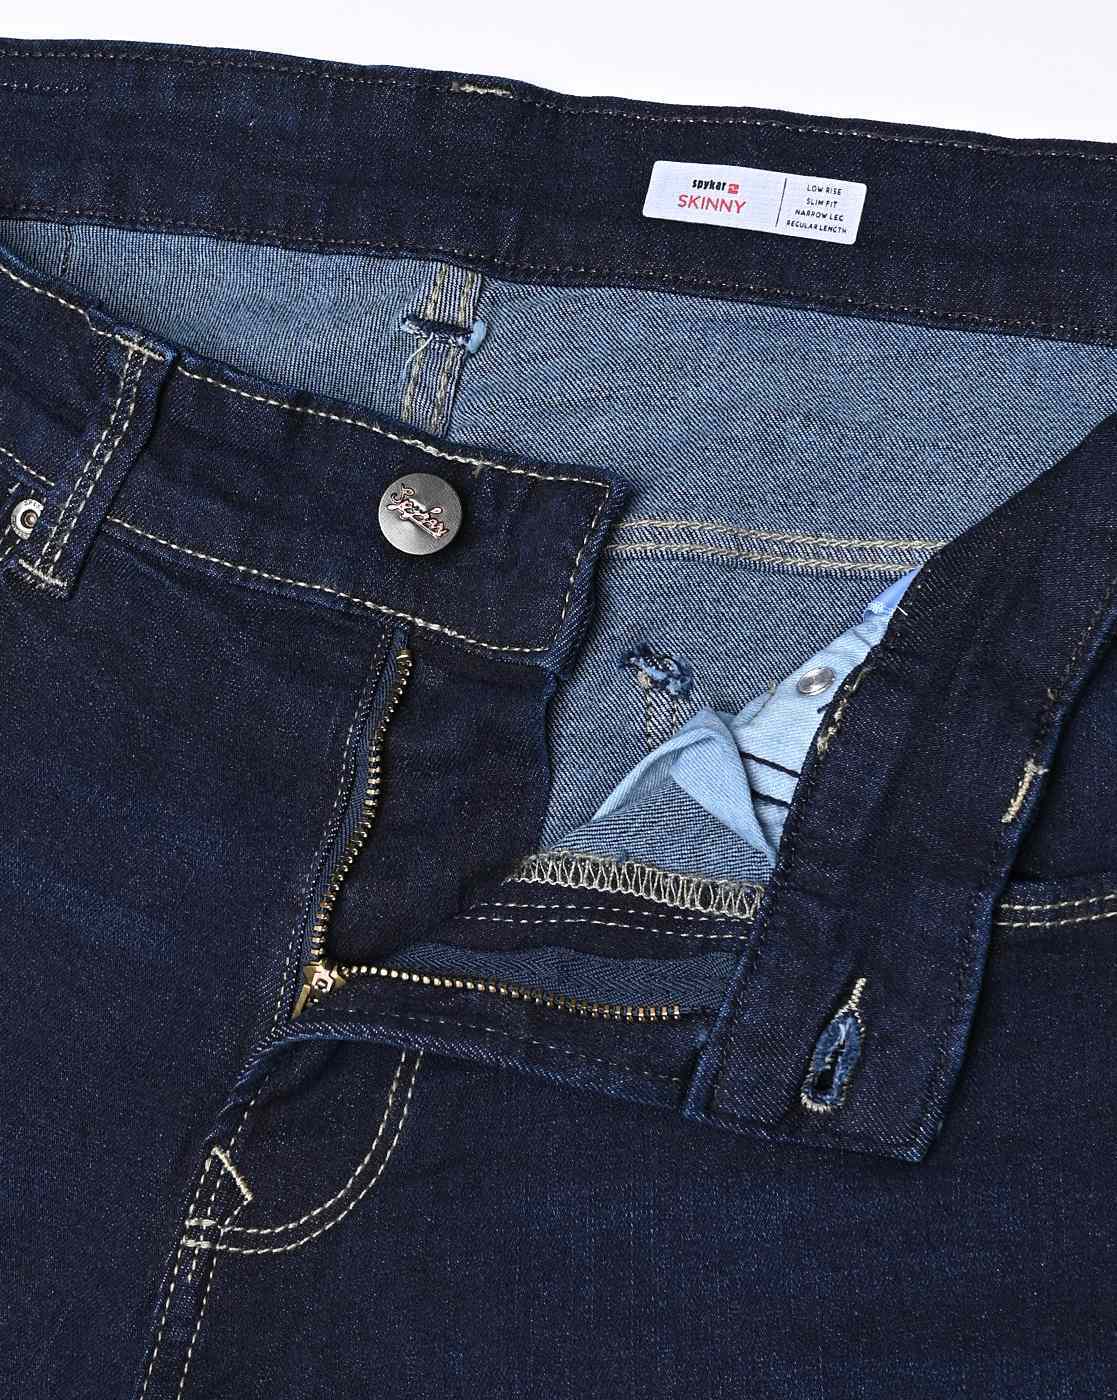 Skin Fit Spykar Blue Washed Low Rise Skinny Fit Jeans at Rs 3699/piece in  Indore